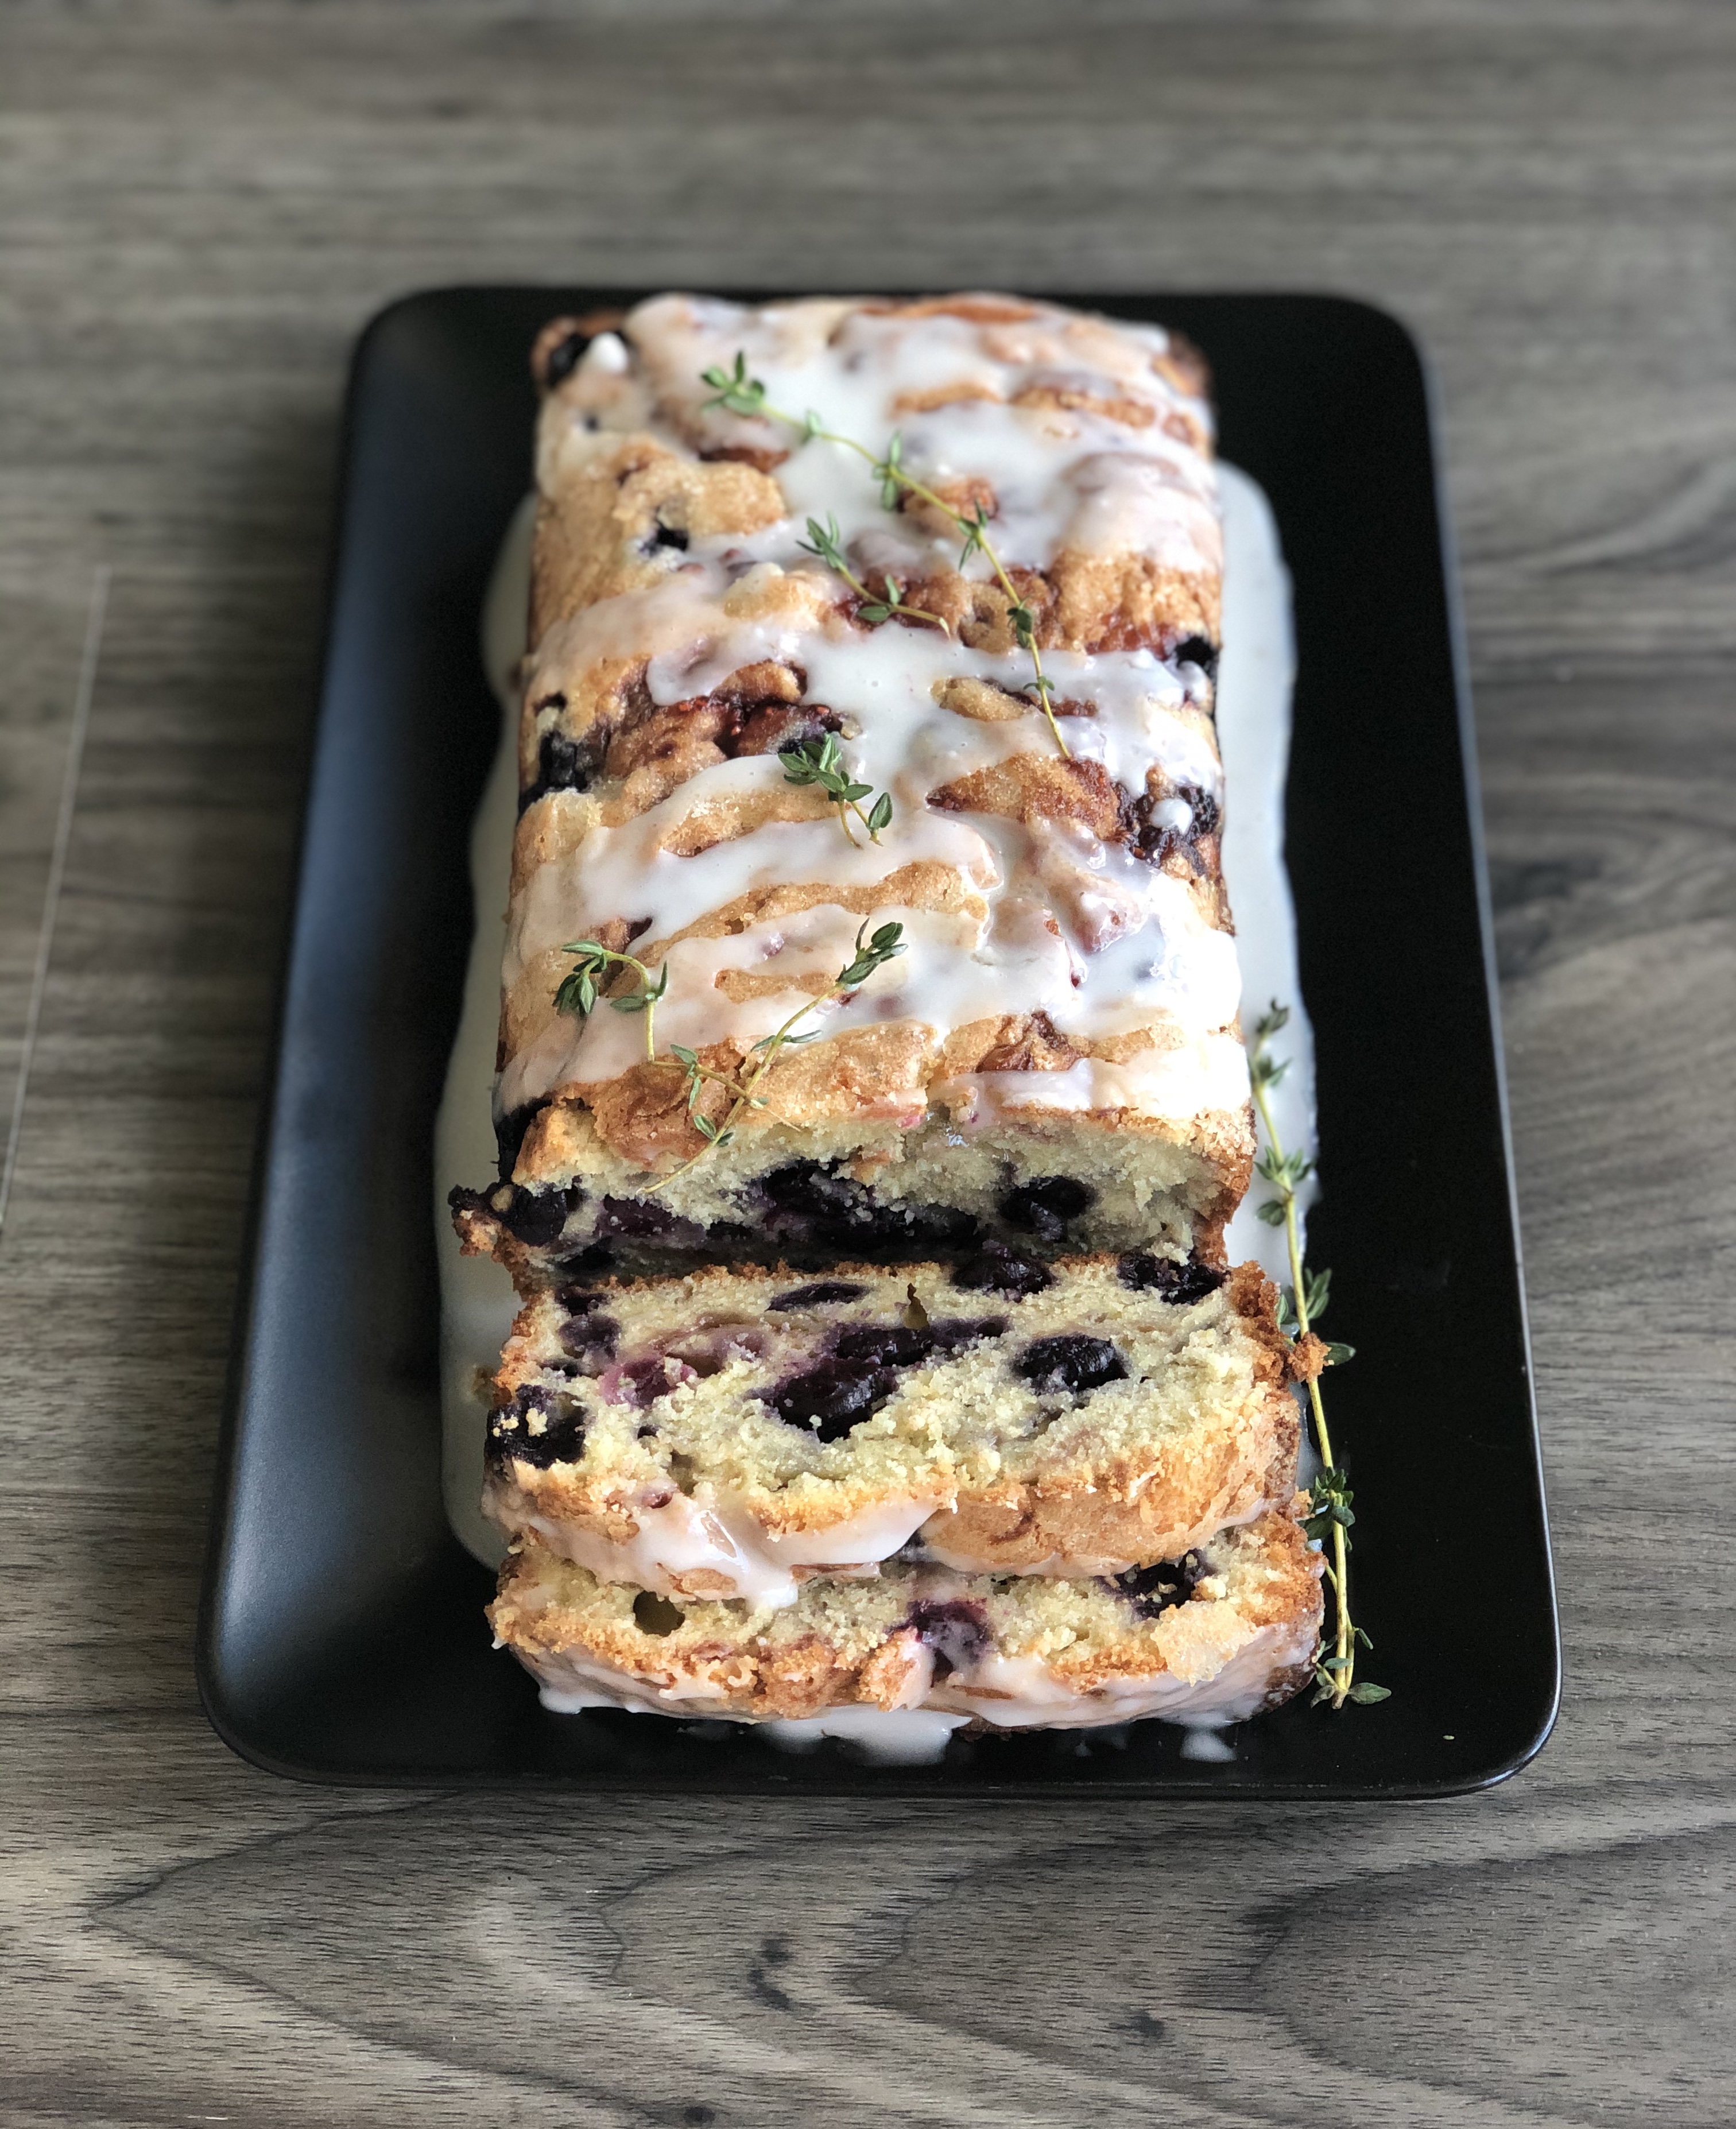 Blueberry Loaf cake sliced and drizzled with lemon glaze and fresh thyme leaves.